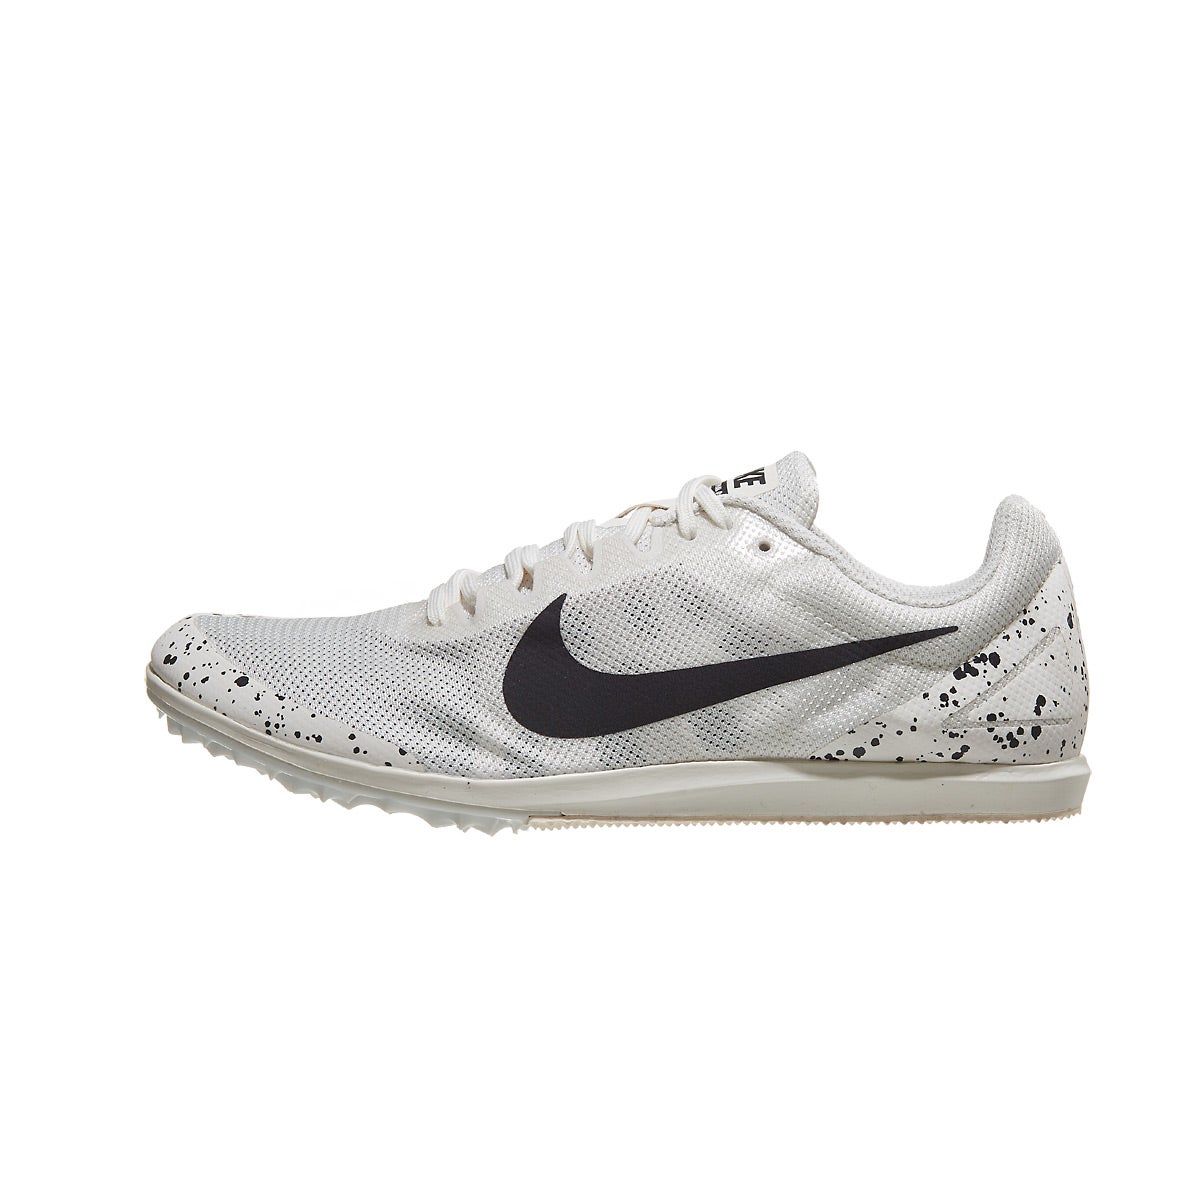 Nike Zoom Rival D 10 Kids Track Shoes 